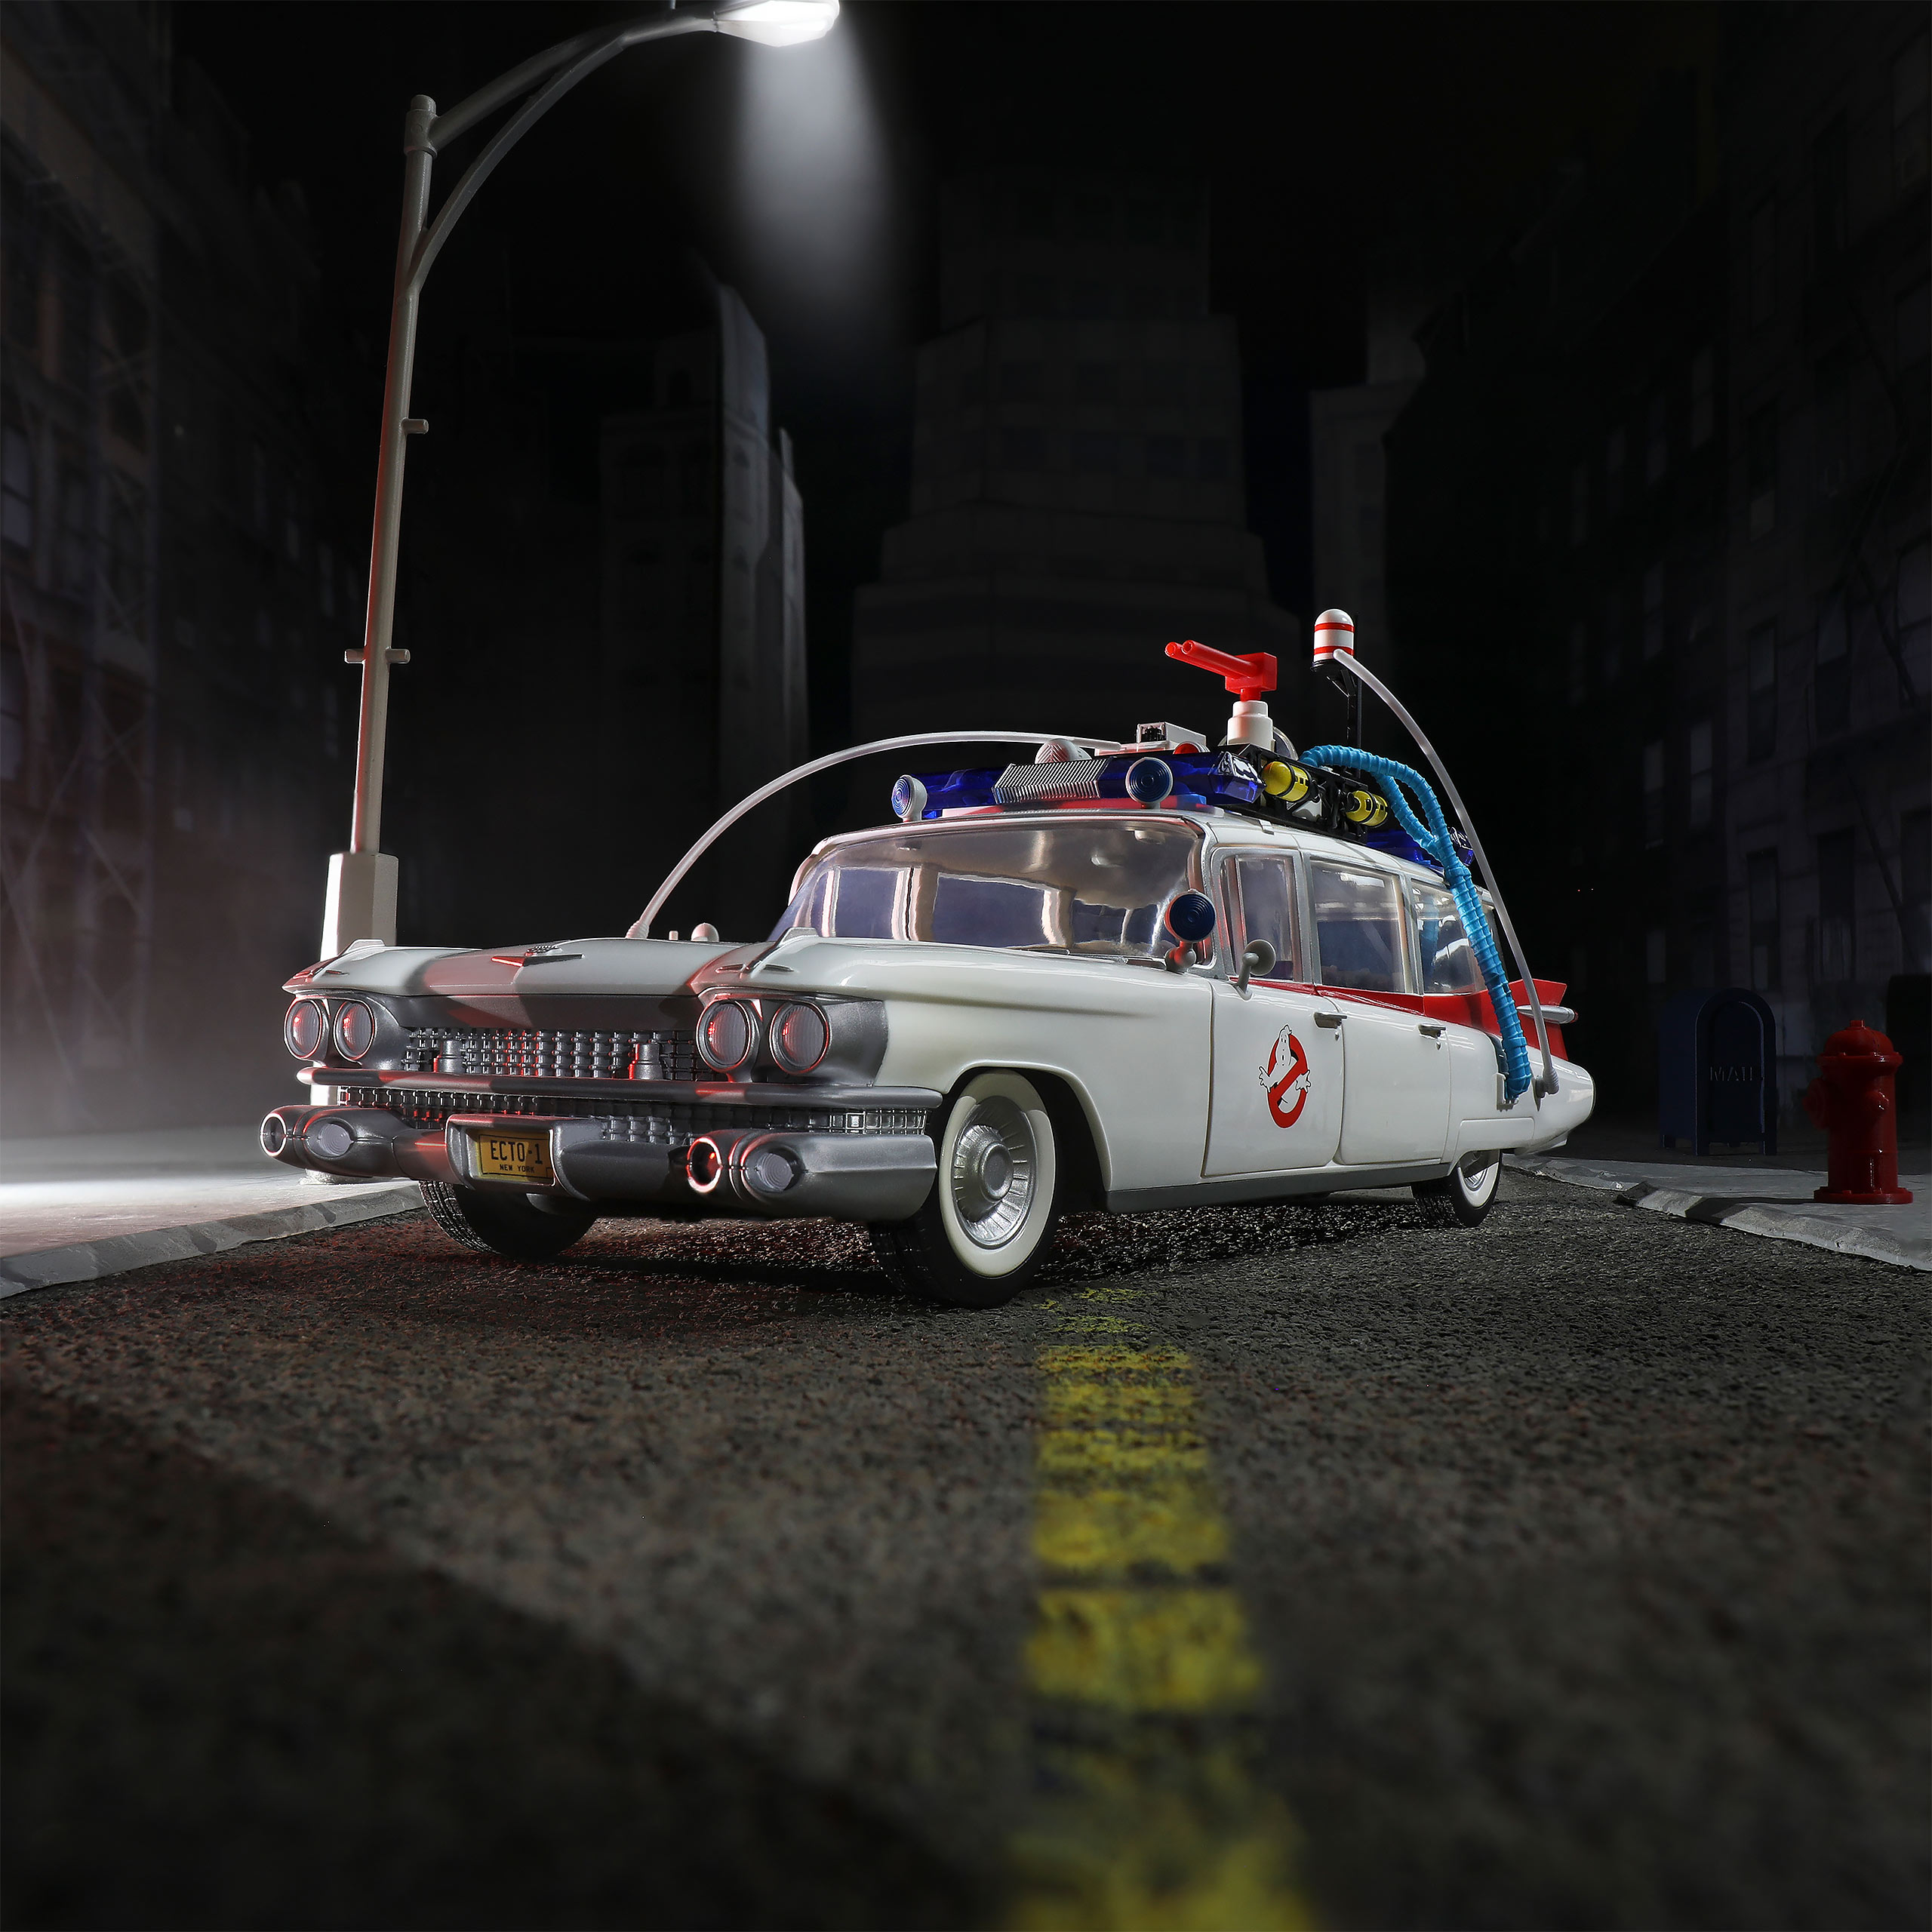 Ghostbusters - Ecto-1 Action Figure Set 40th Anniversary